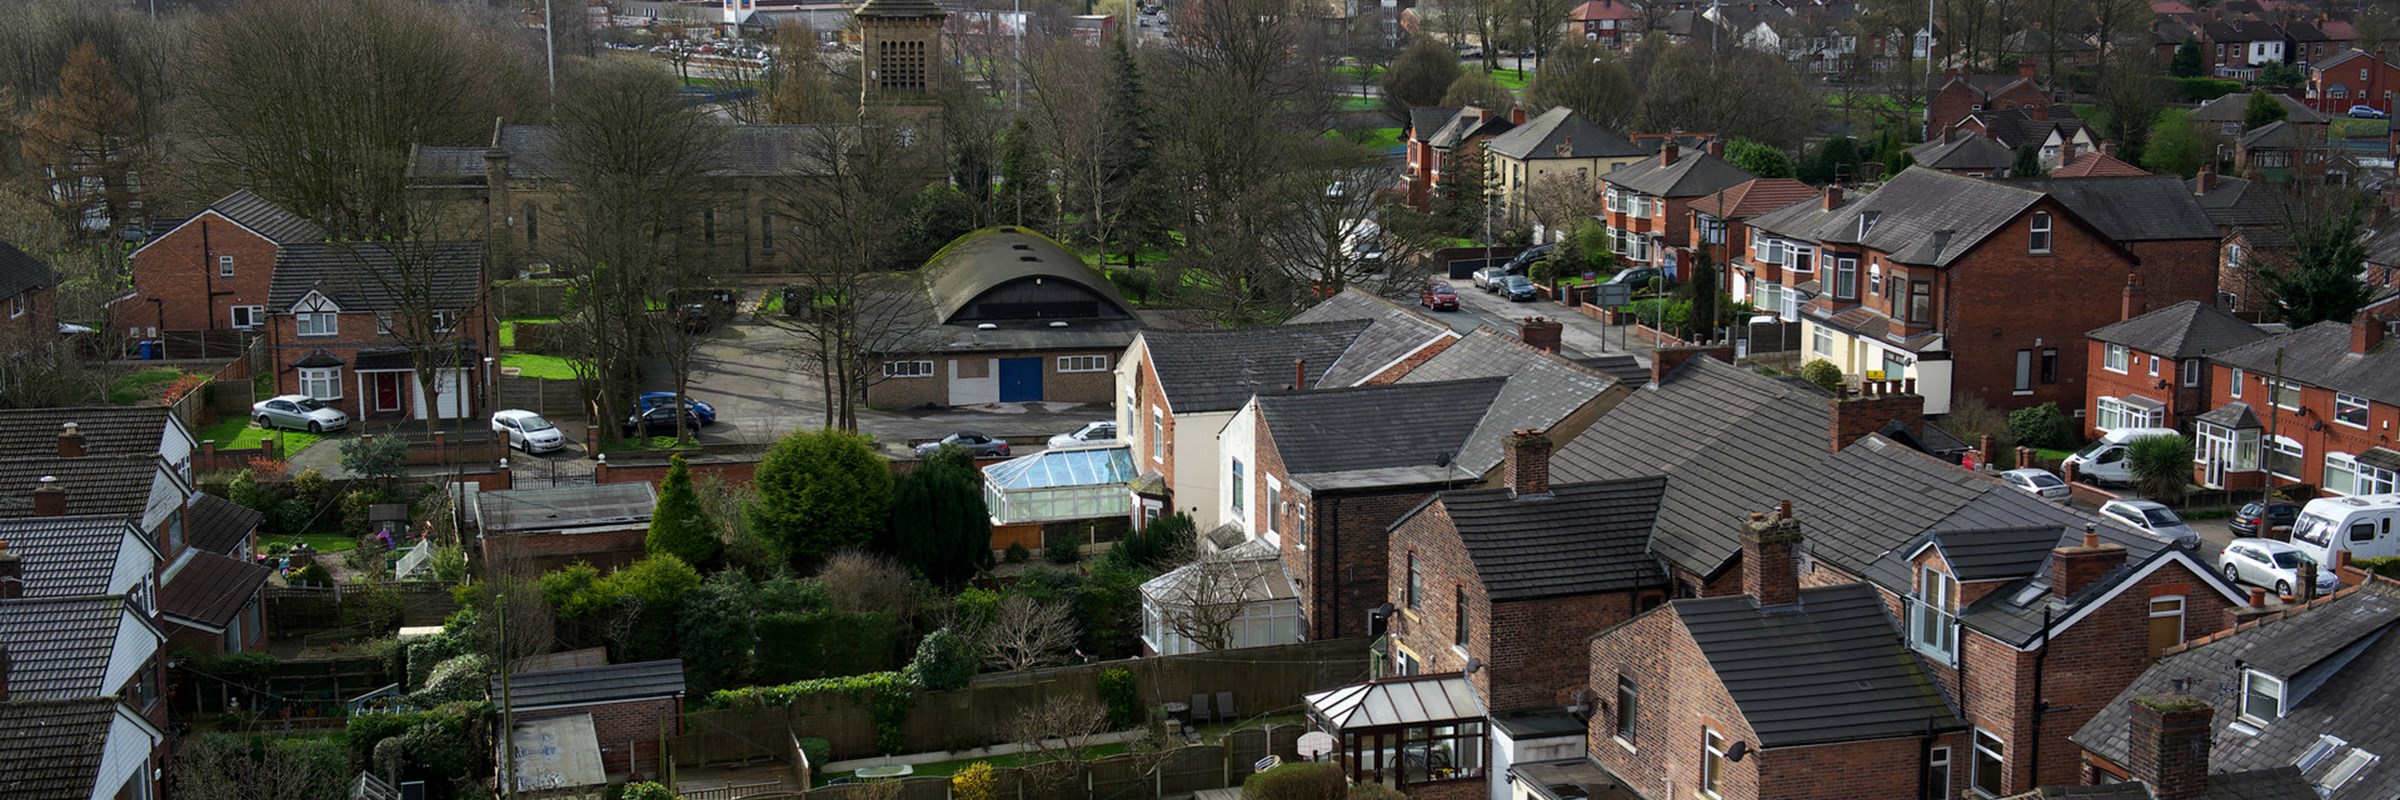 An aerial view of houses and gardens on a housing estate